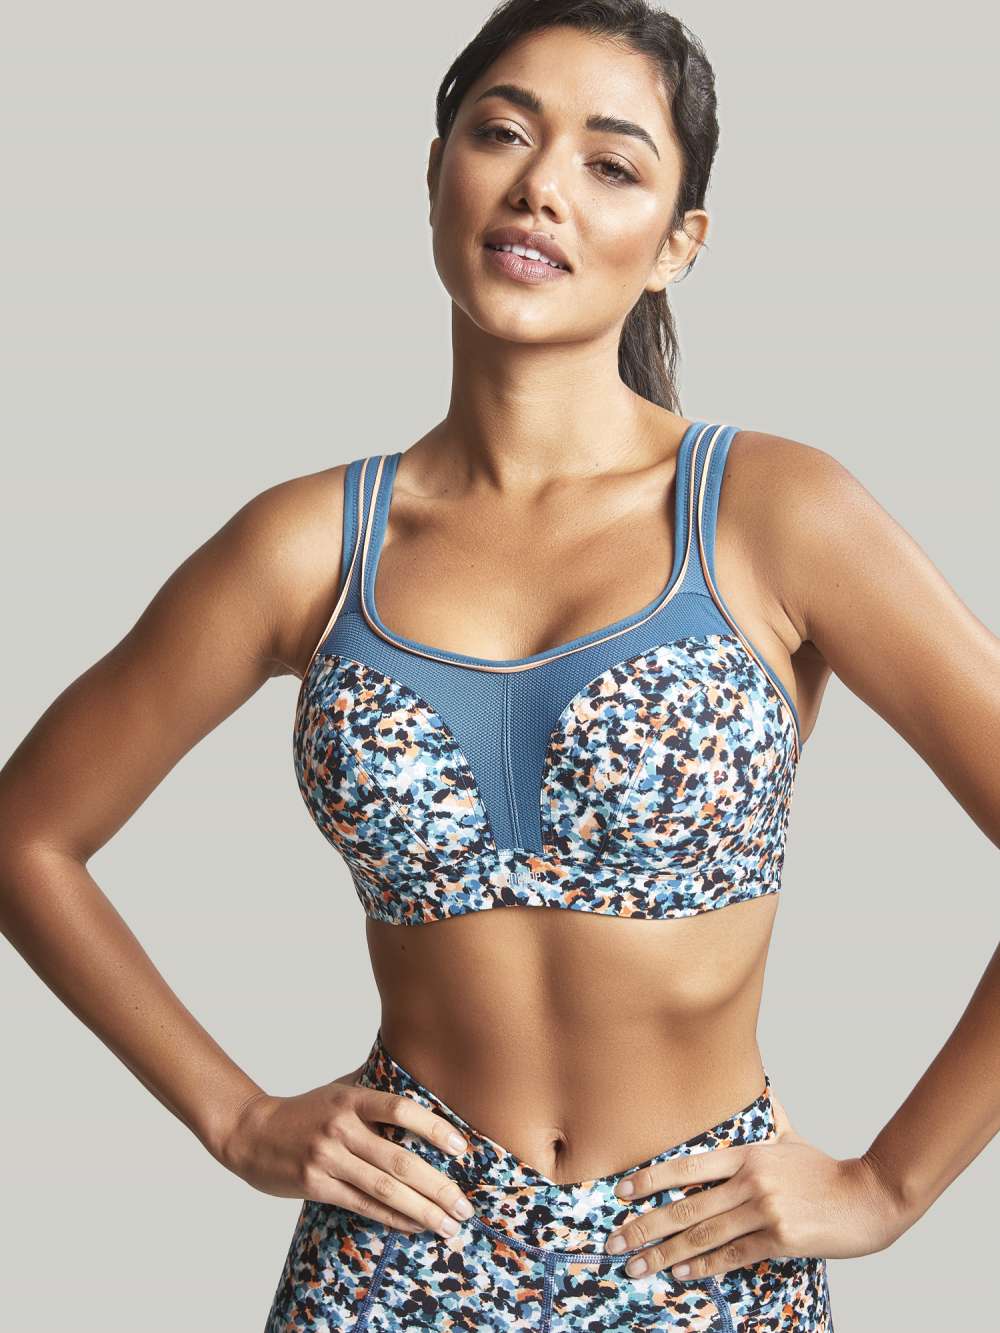 Panache | Wired Sports Bra | Teal / Lime